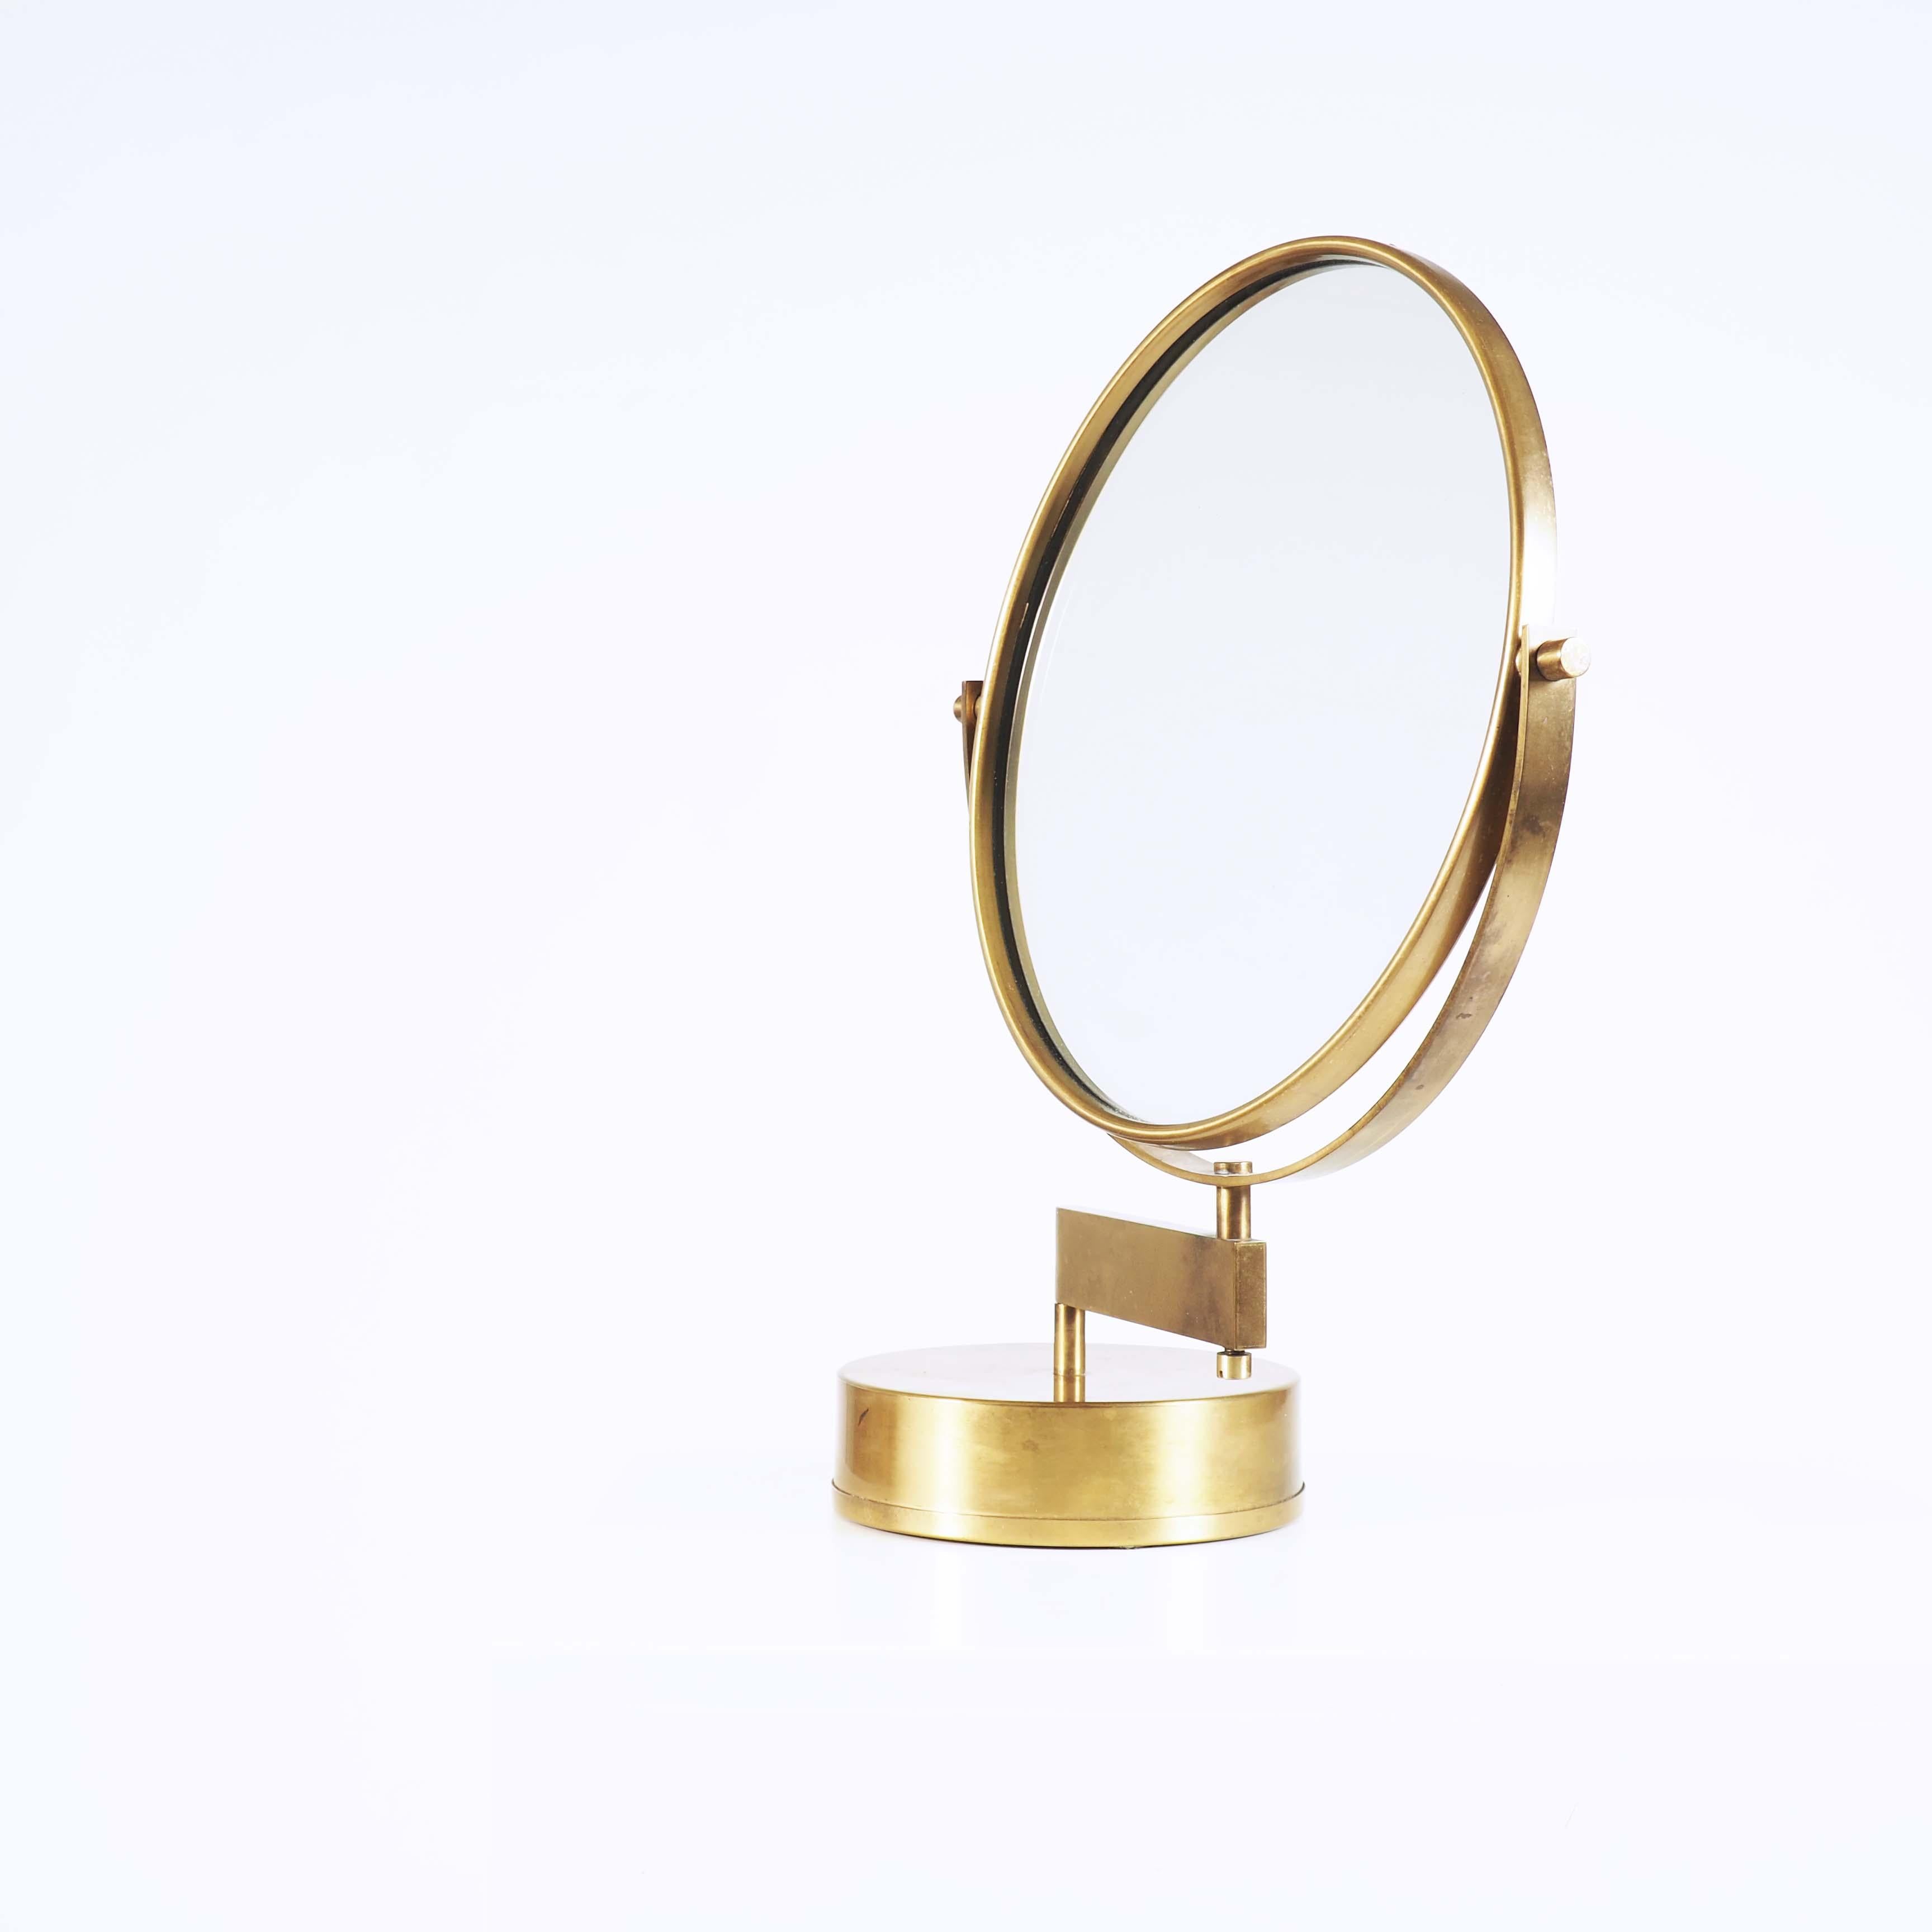 Table mirror in brass with an adjustable arm. Designed by Hans Agne Jakobsson and made at his own factory in Markaryd, Sweden.
A very heavy base makes it stabile.